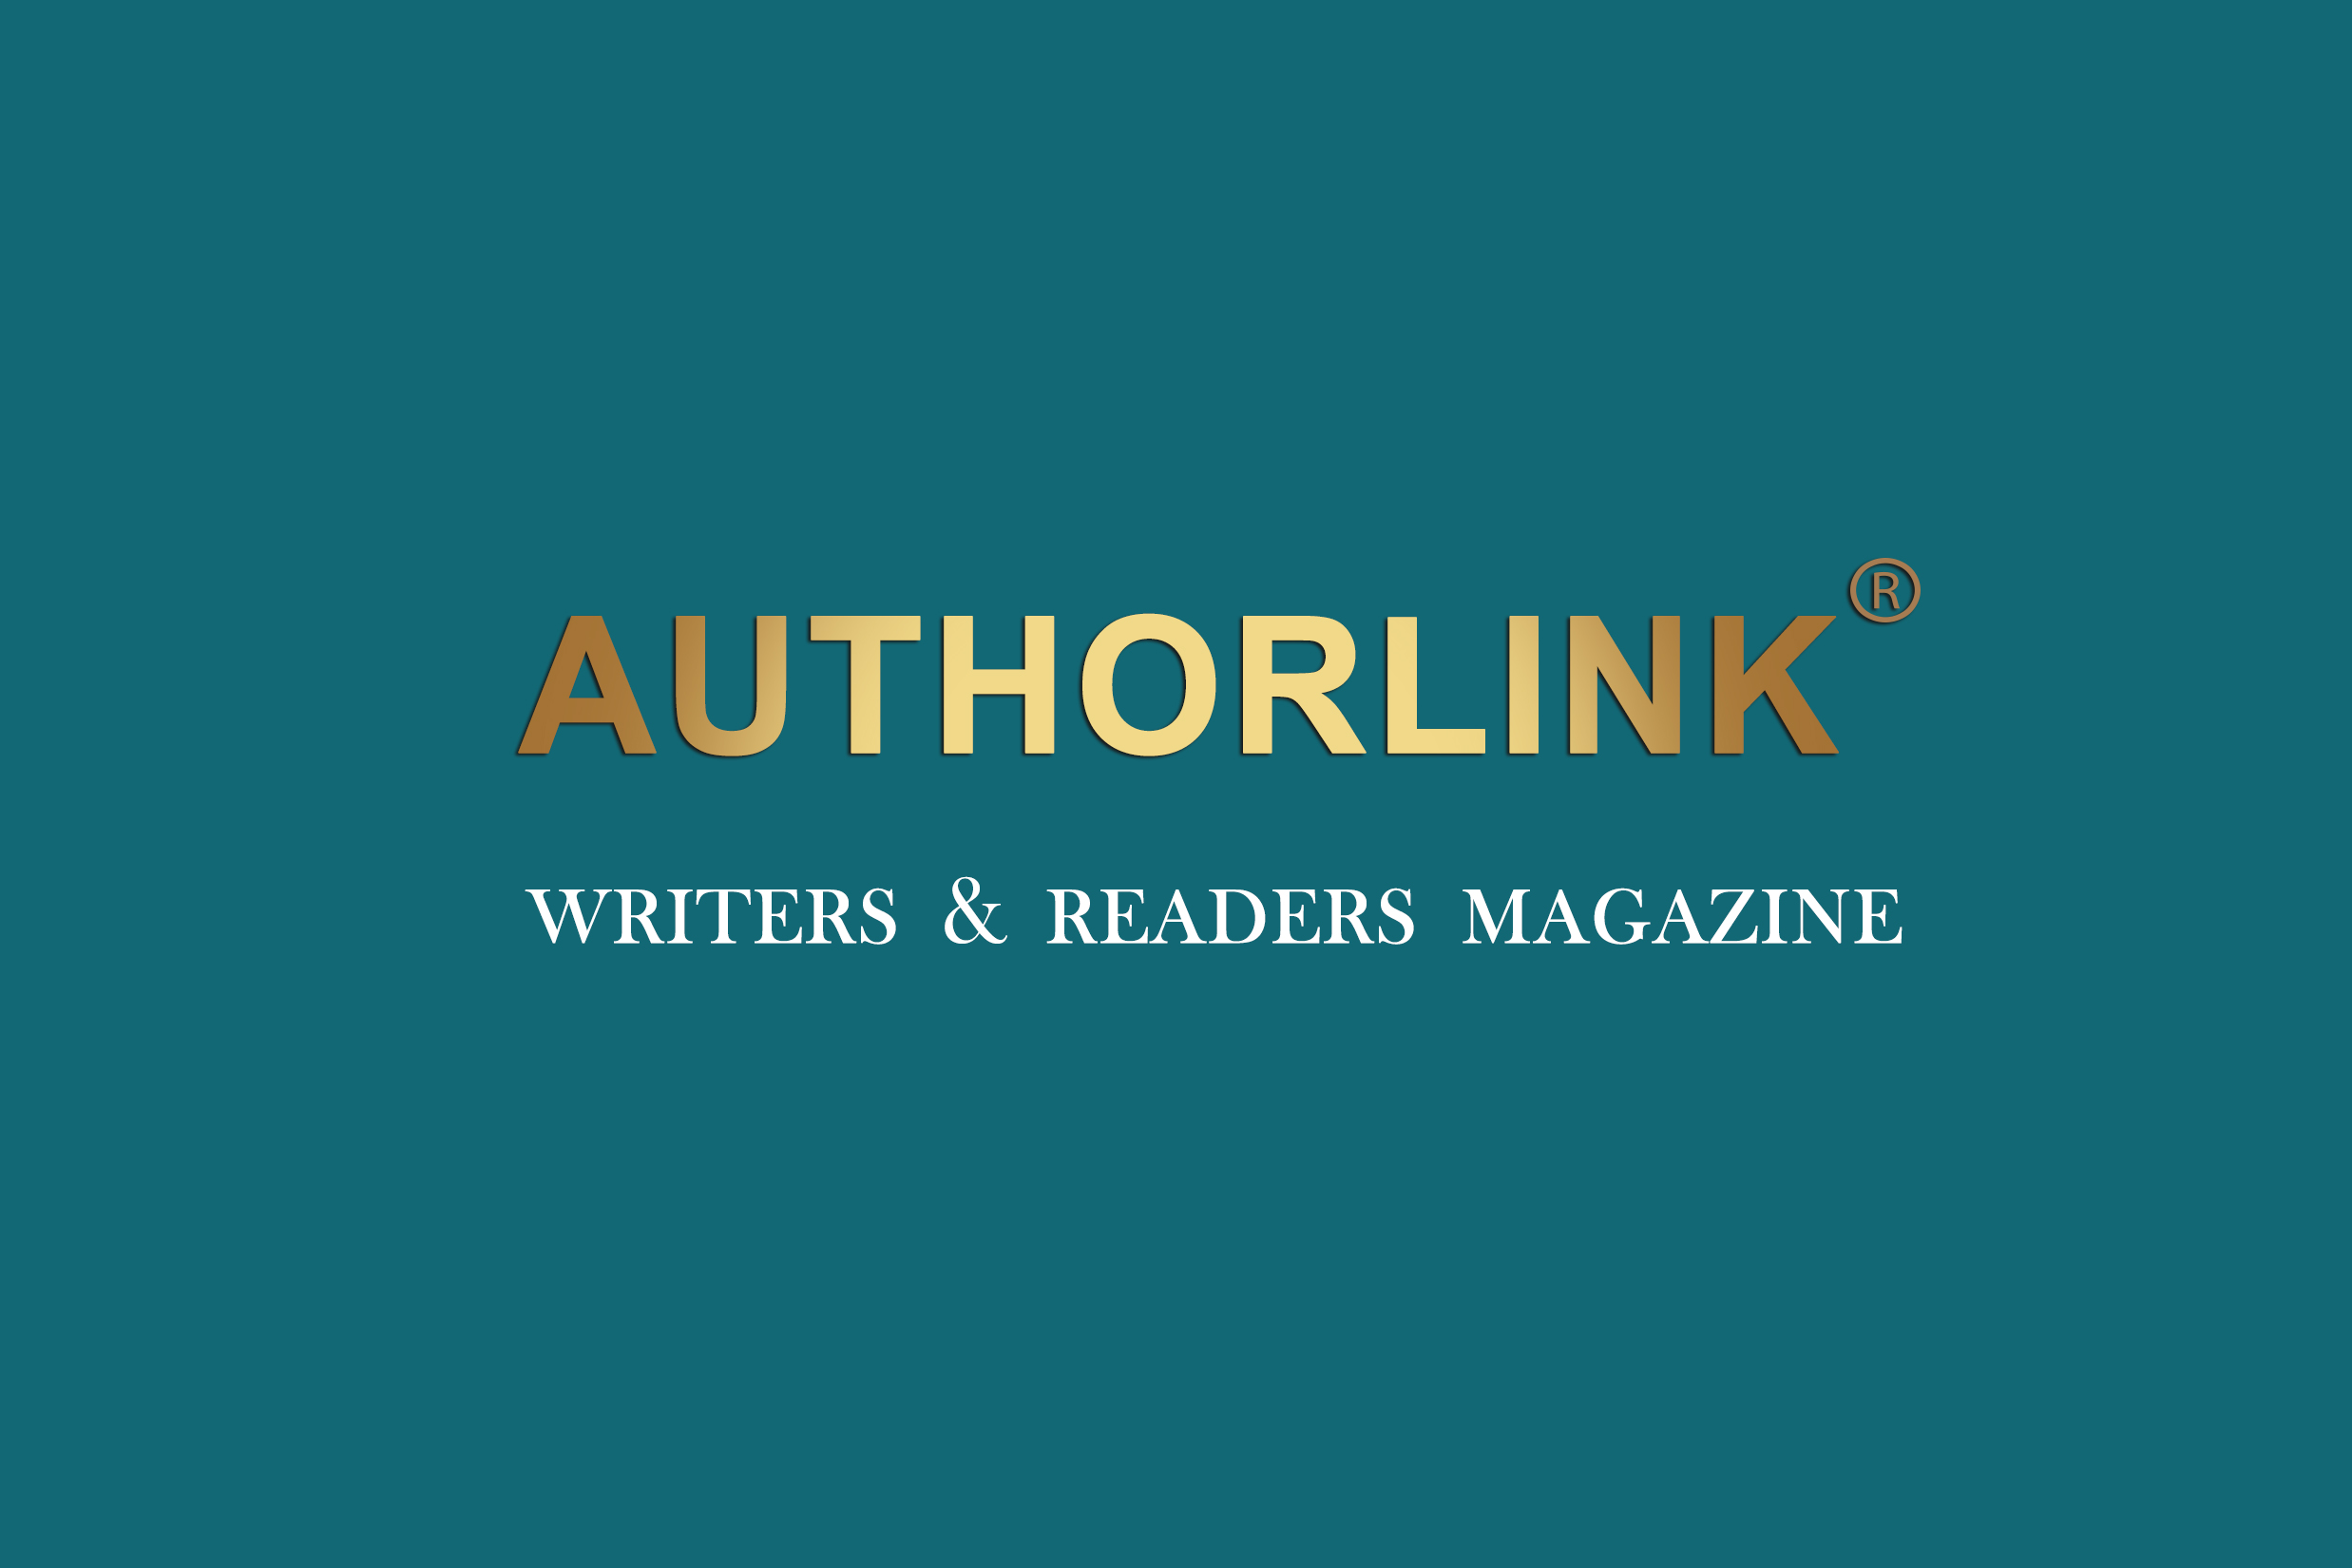 Authorlink.com for editors, agents, writers and readers 